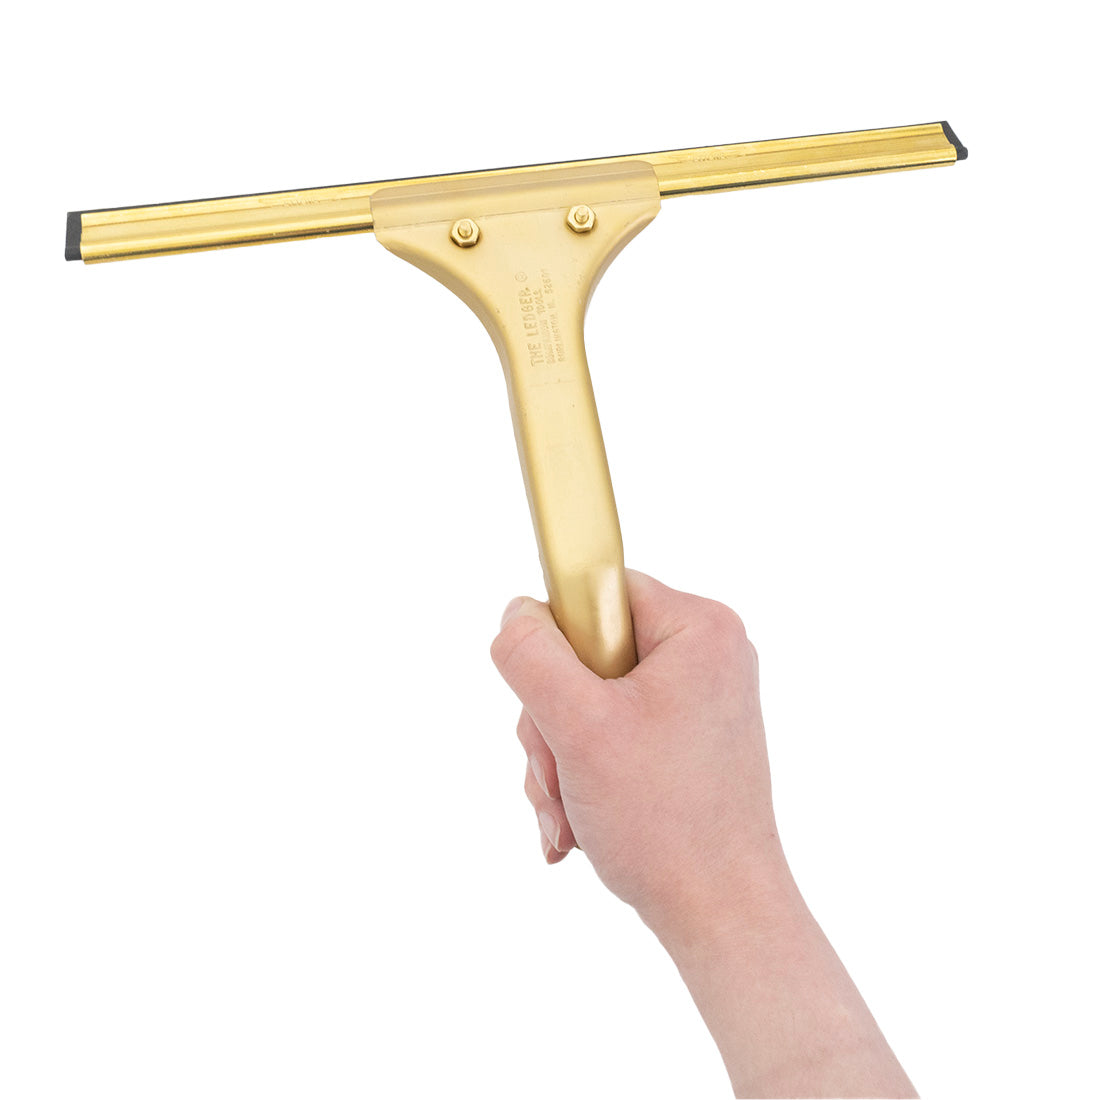 Companion Tools Complete Ledger Squeegee Standard 9 Inch In Hand View